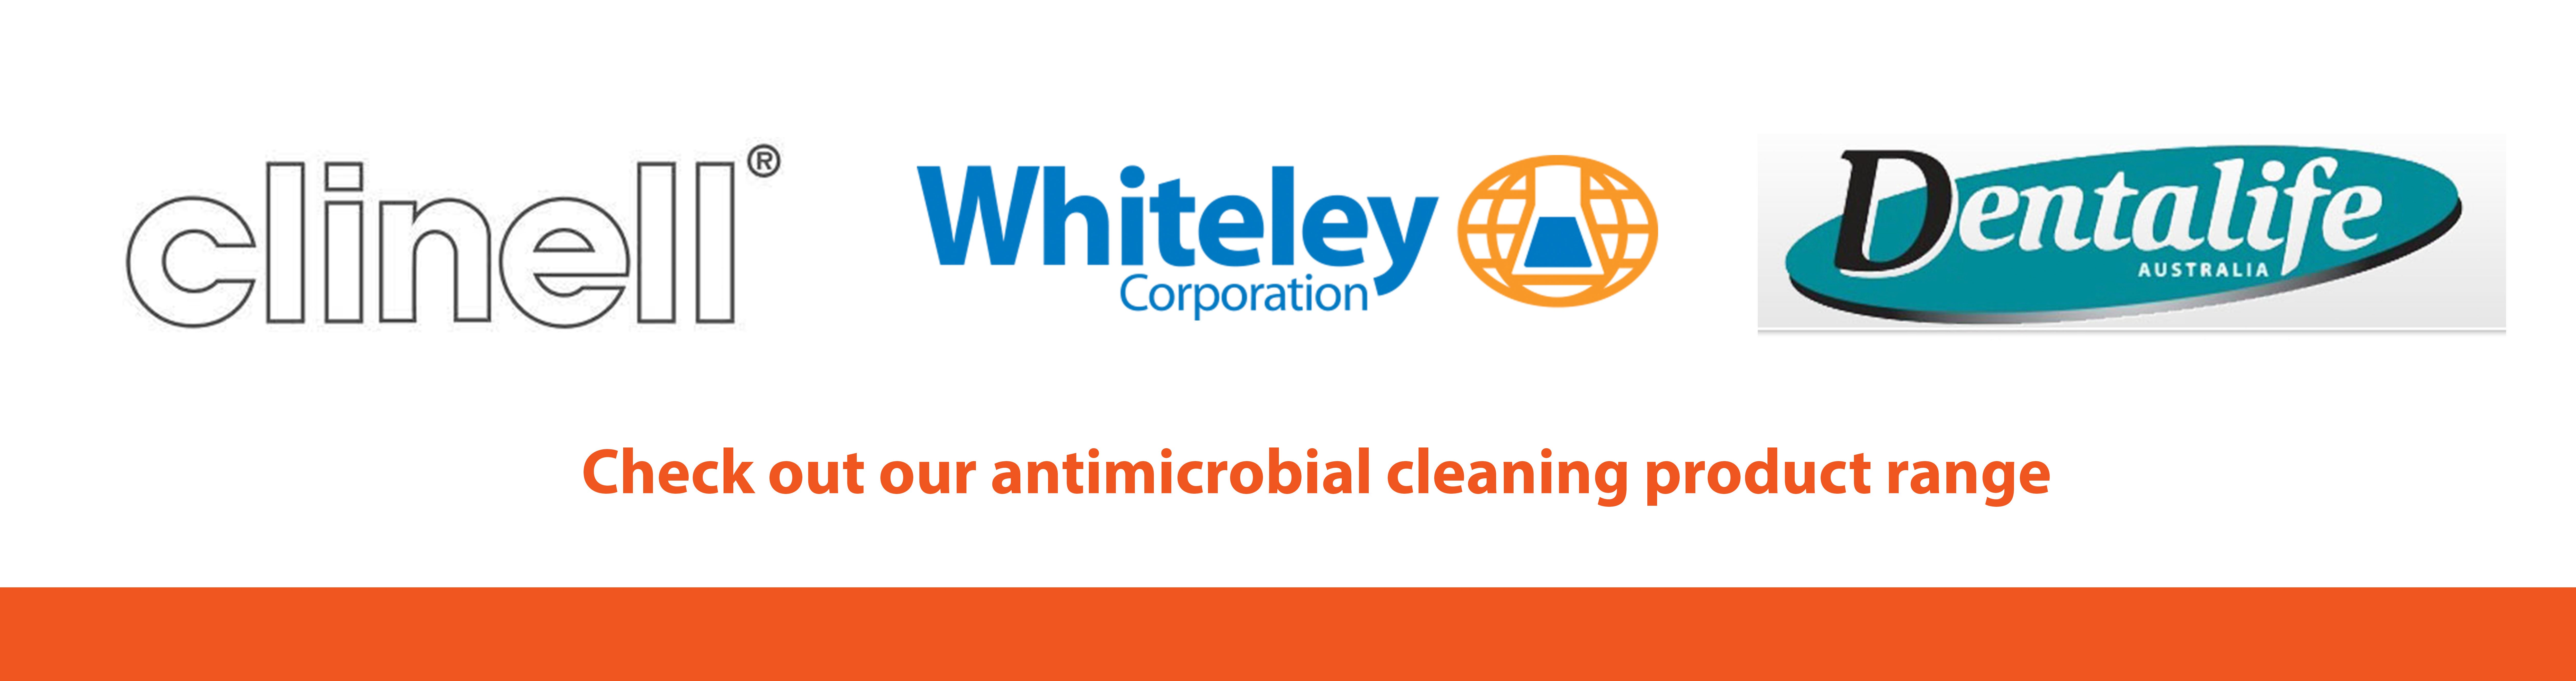 Check out our antimicrobial cleaning product range-1